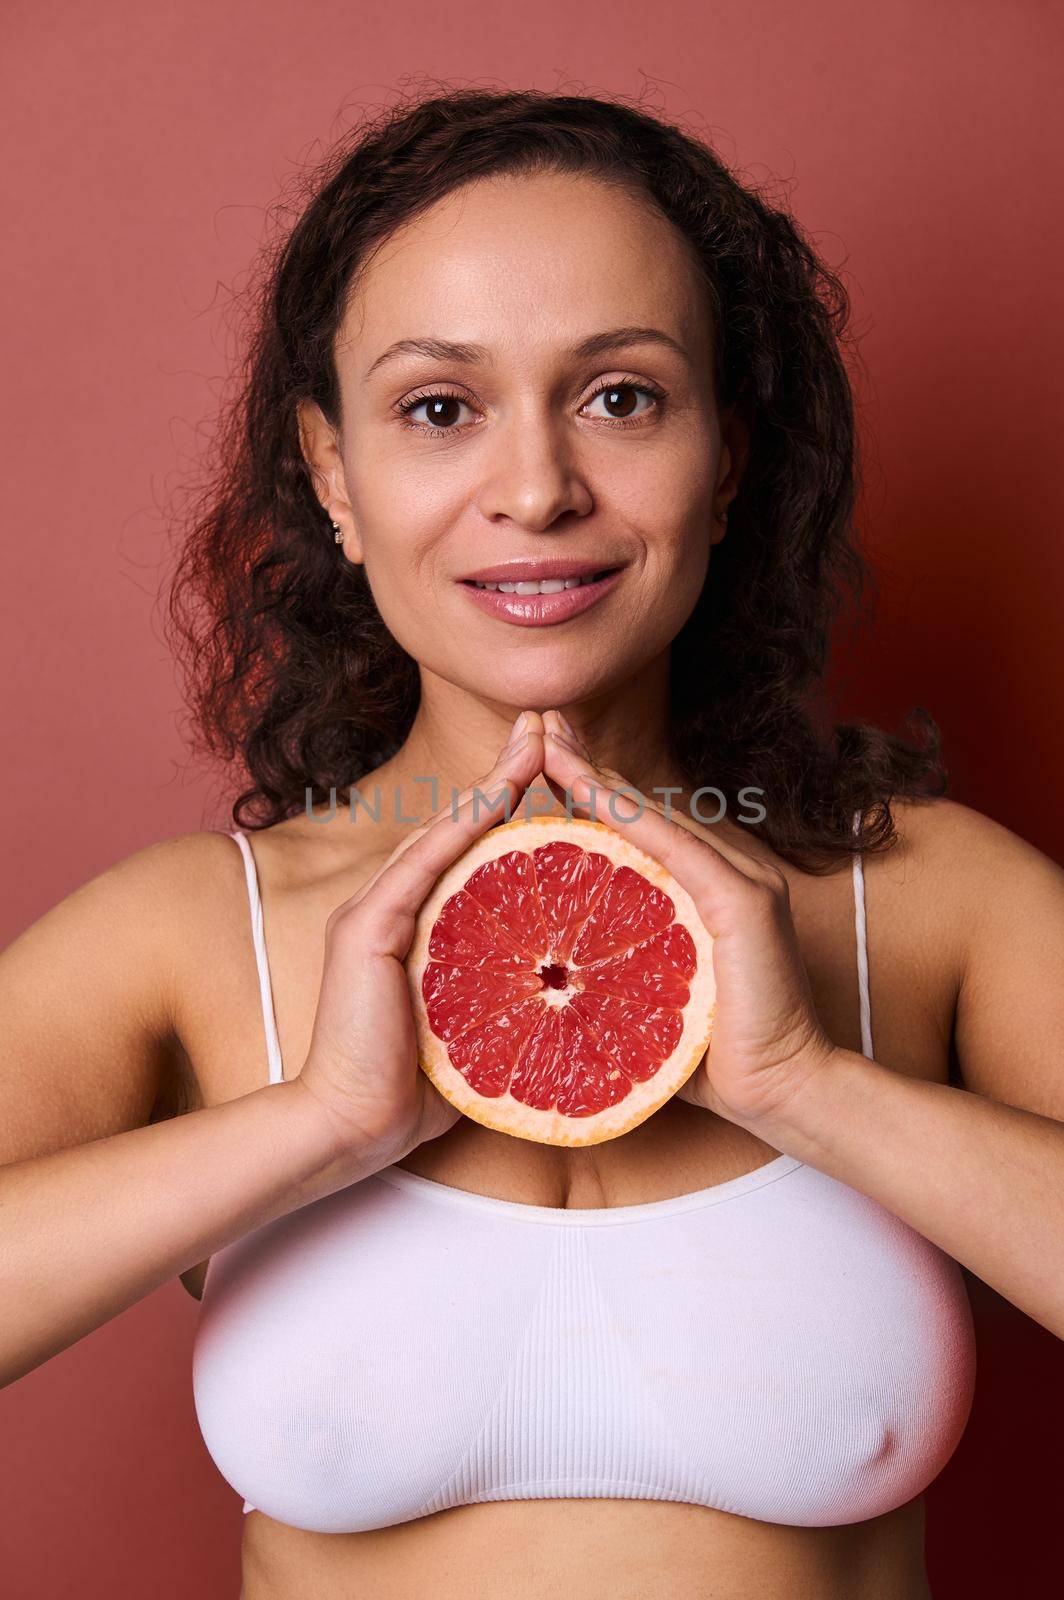 Beauty portrait of an attractive smiling middle aged beautiful woman with dark curly hair hair, wearing white underwear, isolated on bright coral background, holding half of fresh juicy red grapefruit